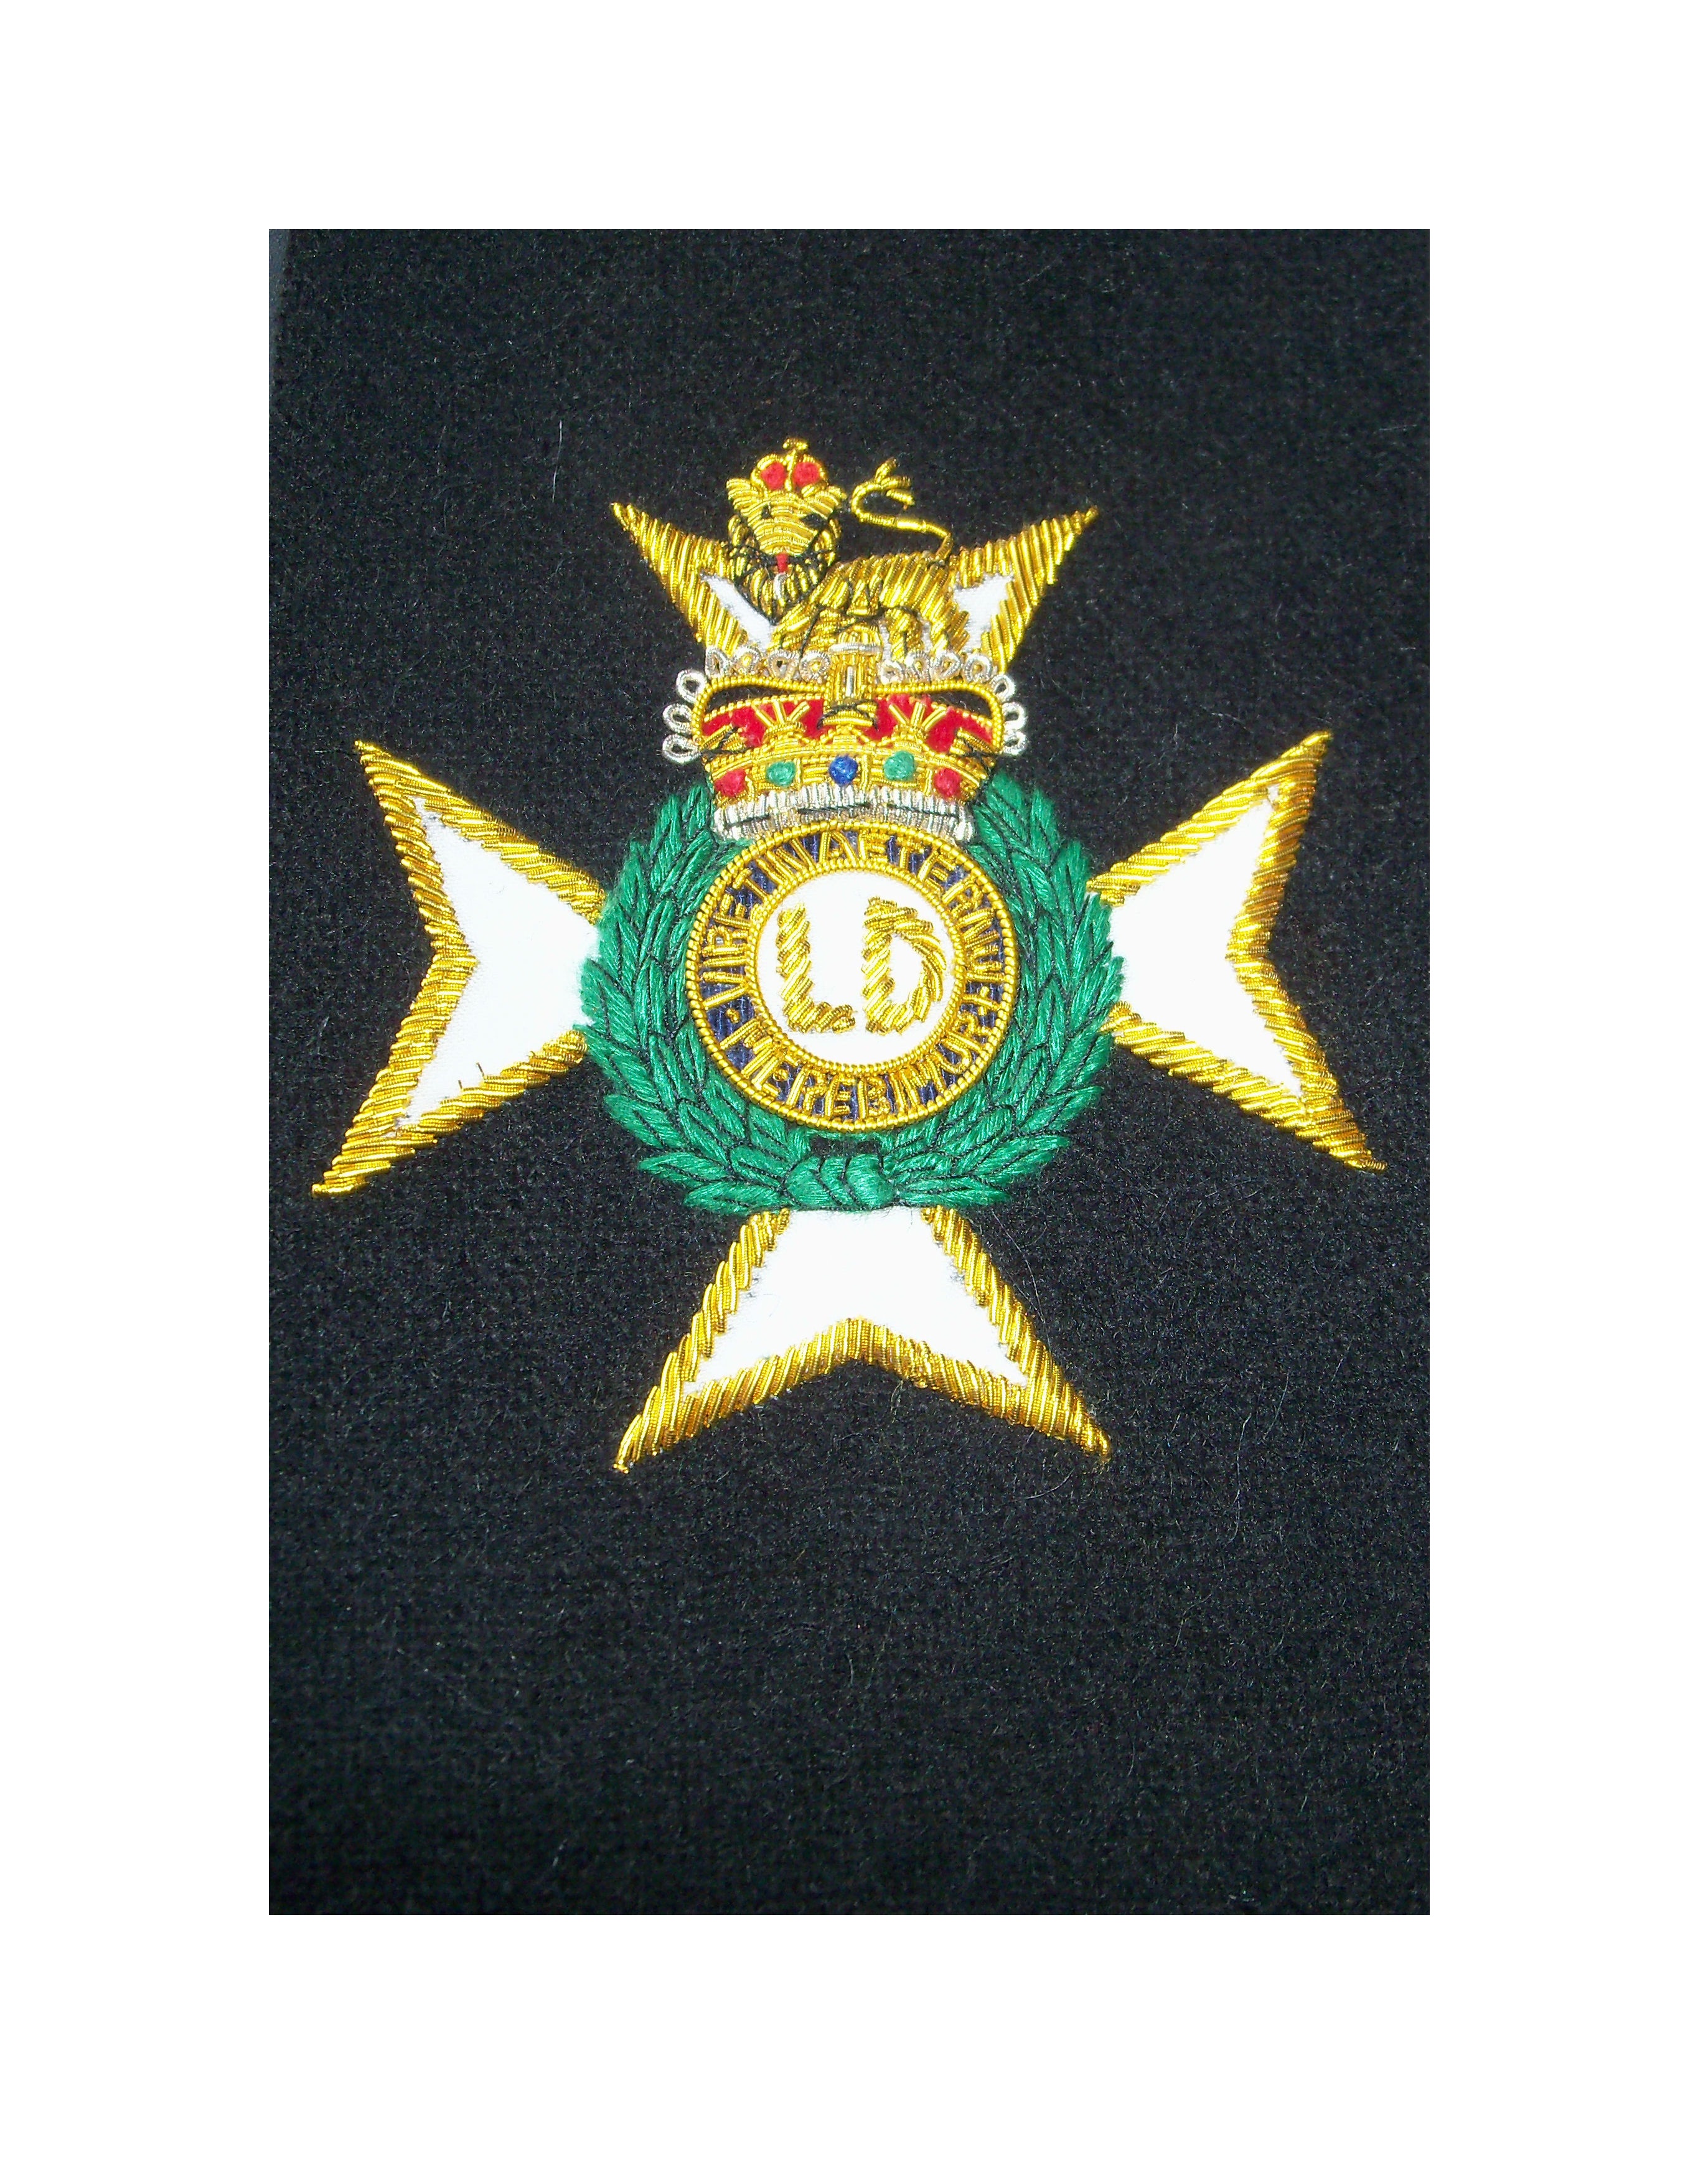 Small Embroidered Badge - Light Dragoons